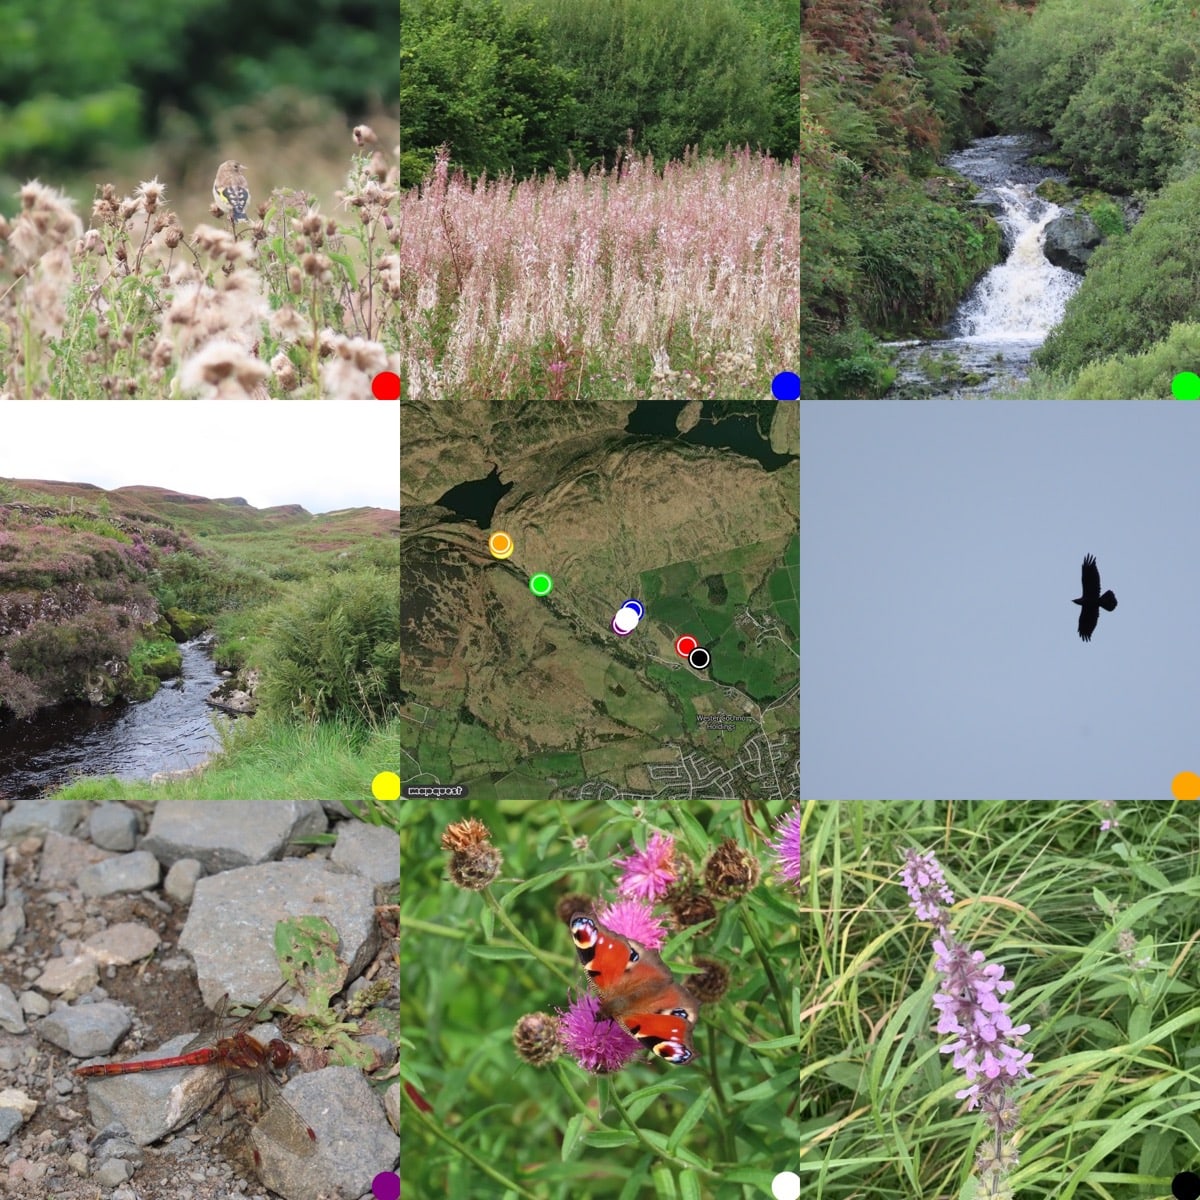 Grid of images 3x3 from topleft: young goldfinch on thistle seed heads; rosebay willowherb in seed; Loch Humphrey Burn small waterfall; Loch Humphrey burn; map with locations of where photos were taken; raven in sky;Common darter on path; Peacock butterfly on knapweed; marsh woundwort